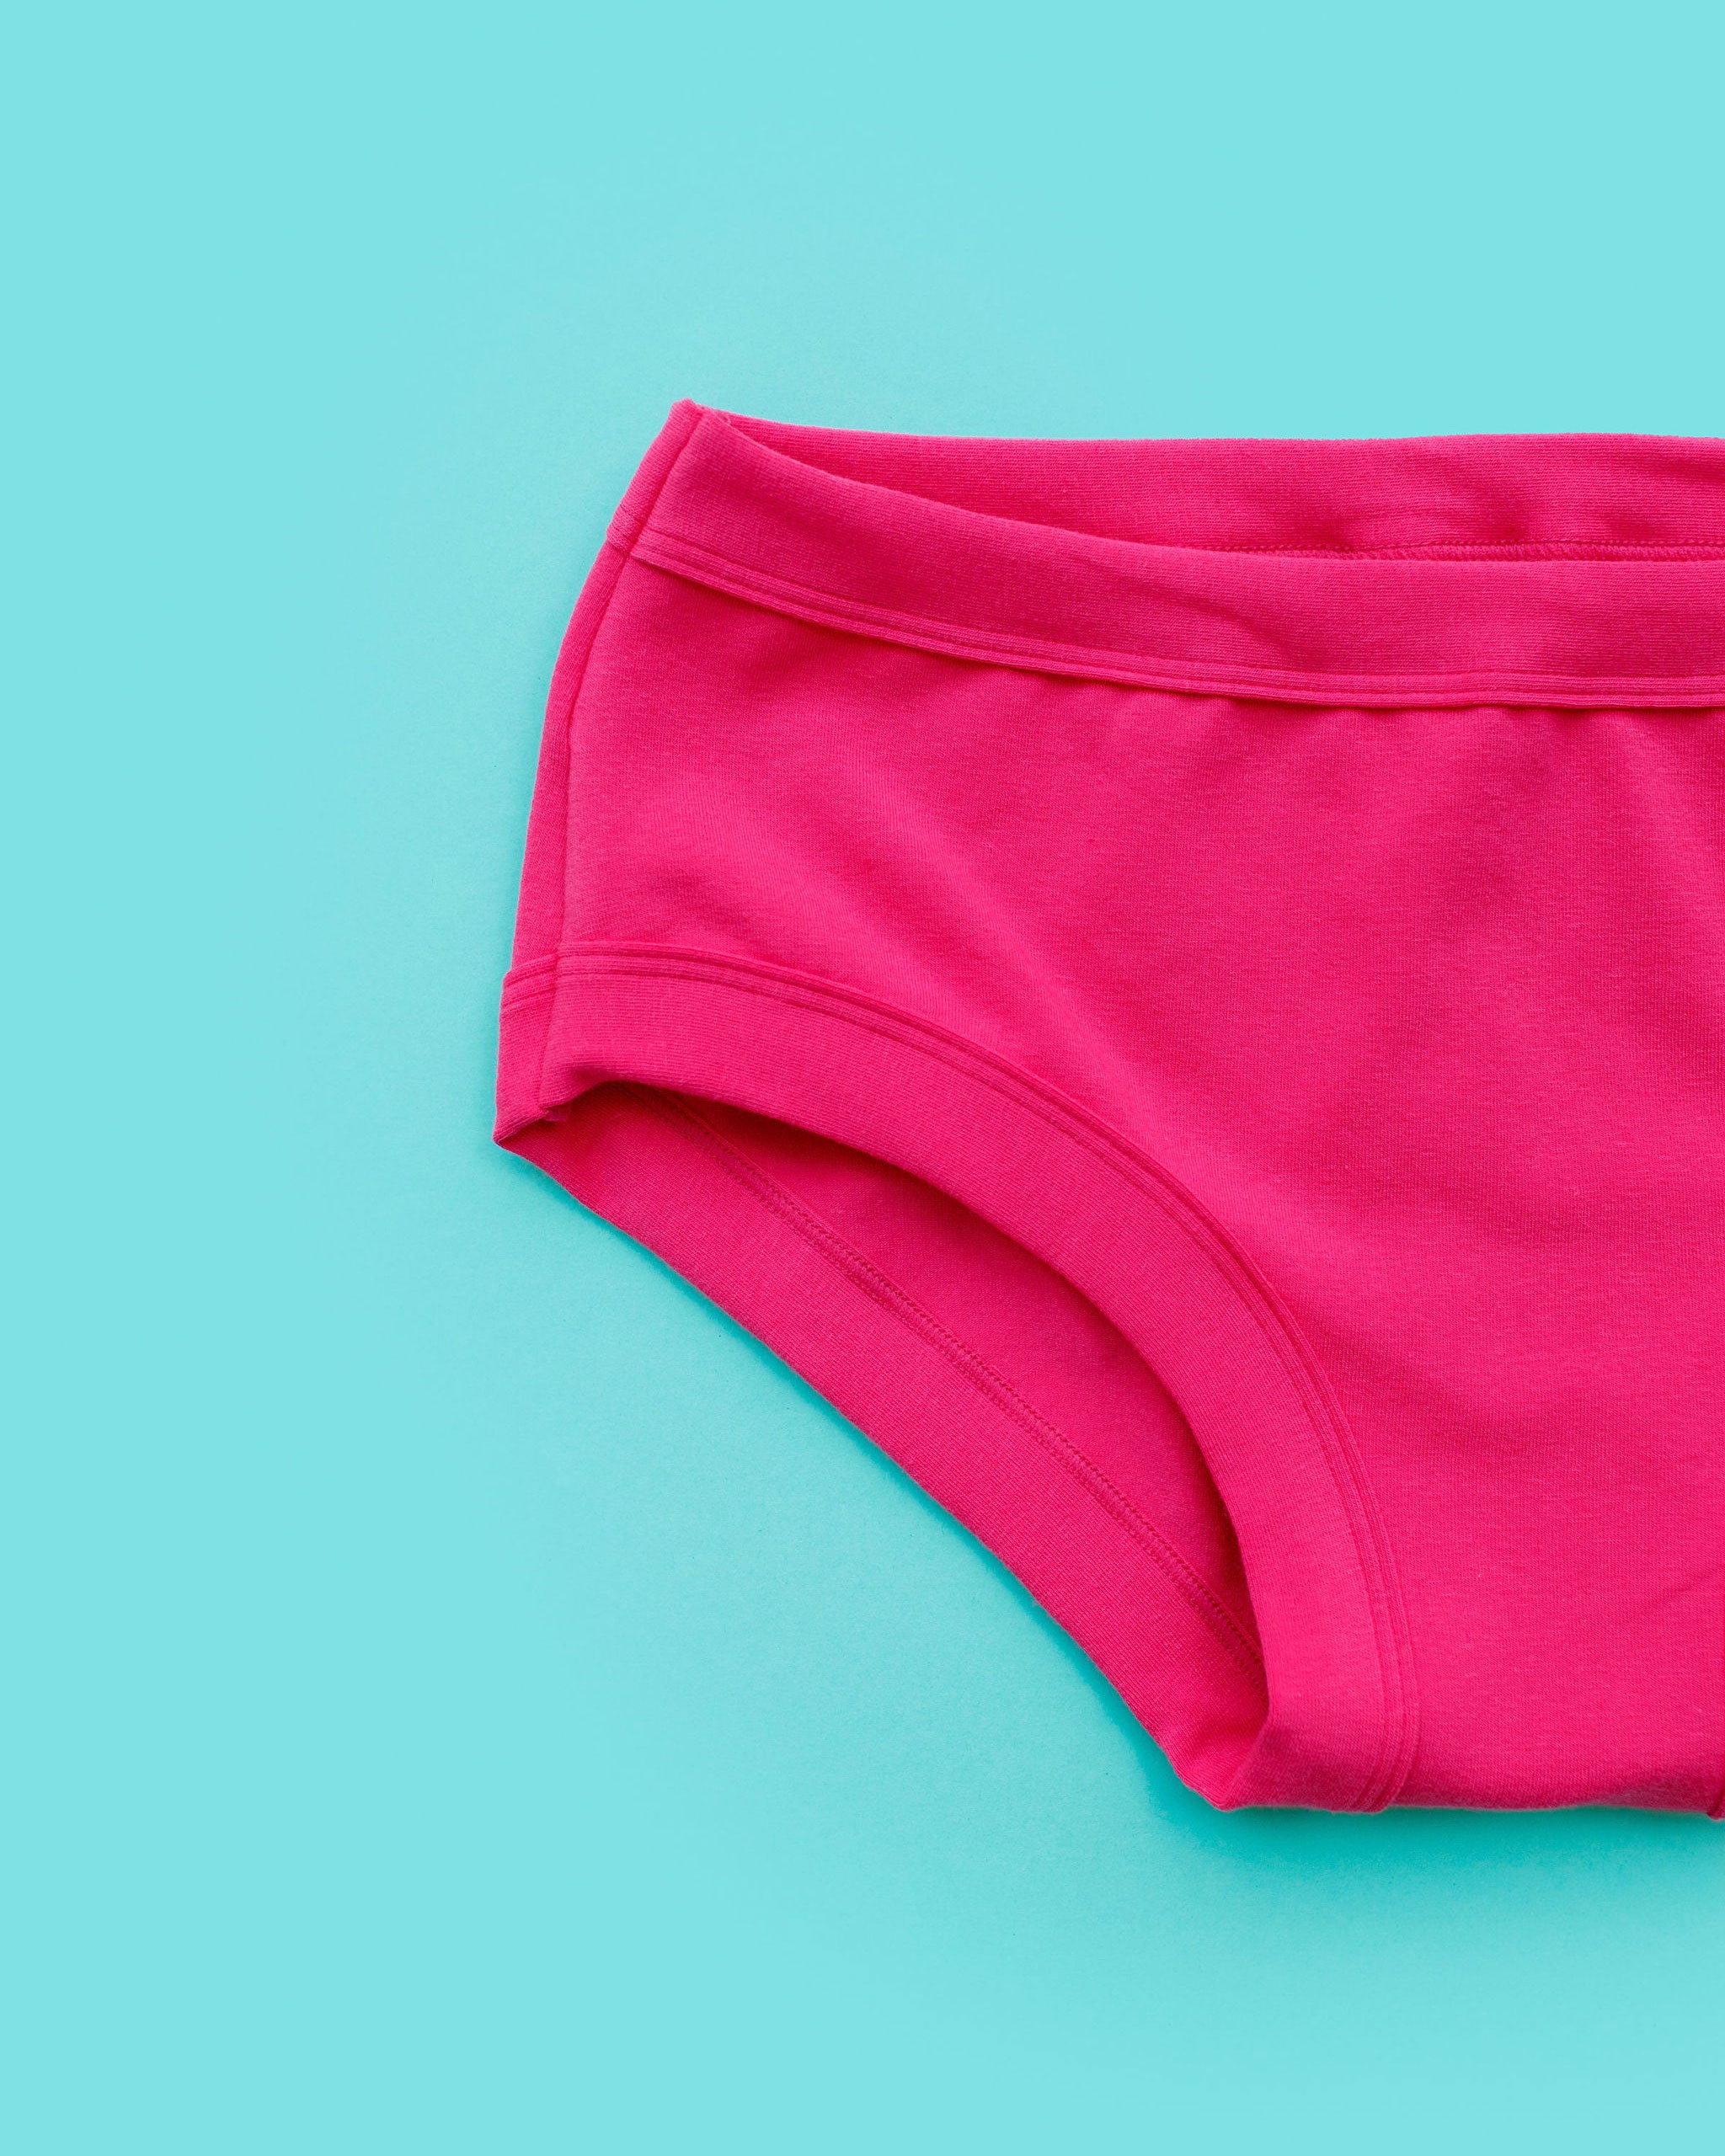 Flat lay of Thunderpants Hipster style underwear in a hot pink color.